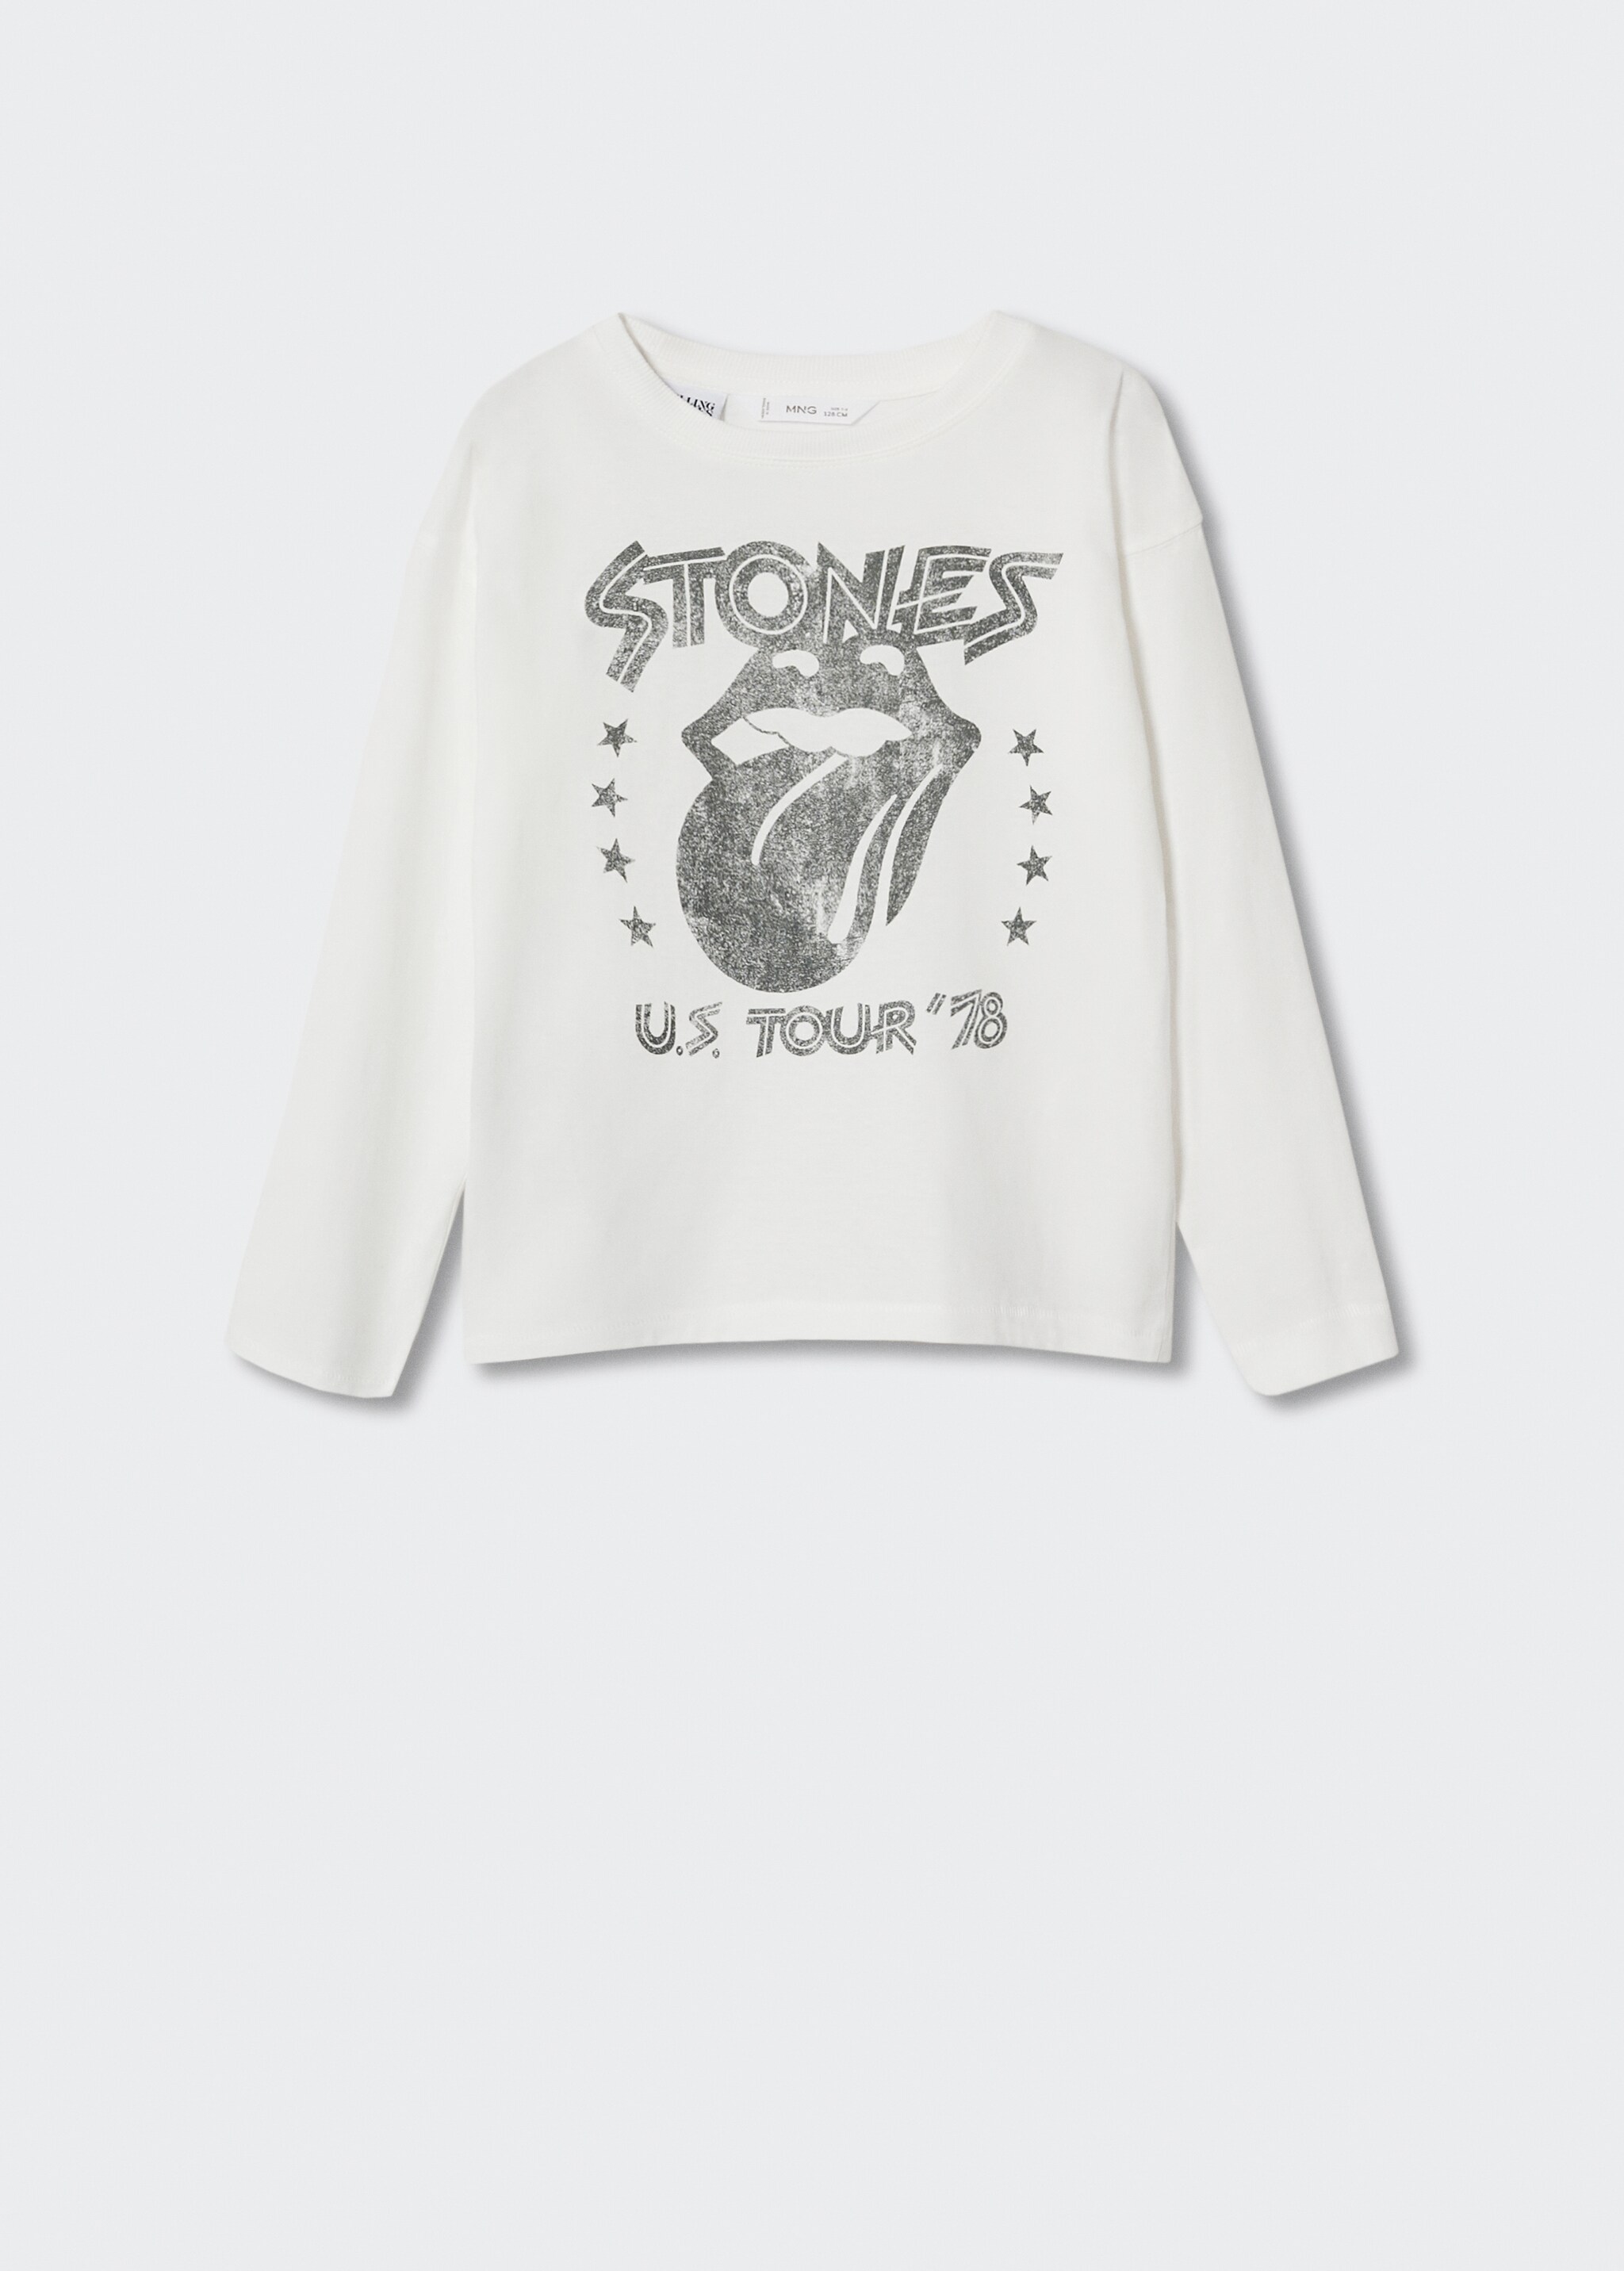 Rolling Stones sweatshirt - Article without model